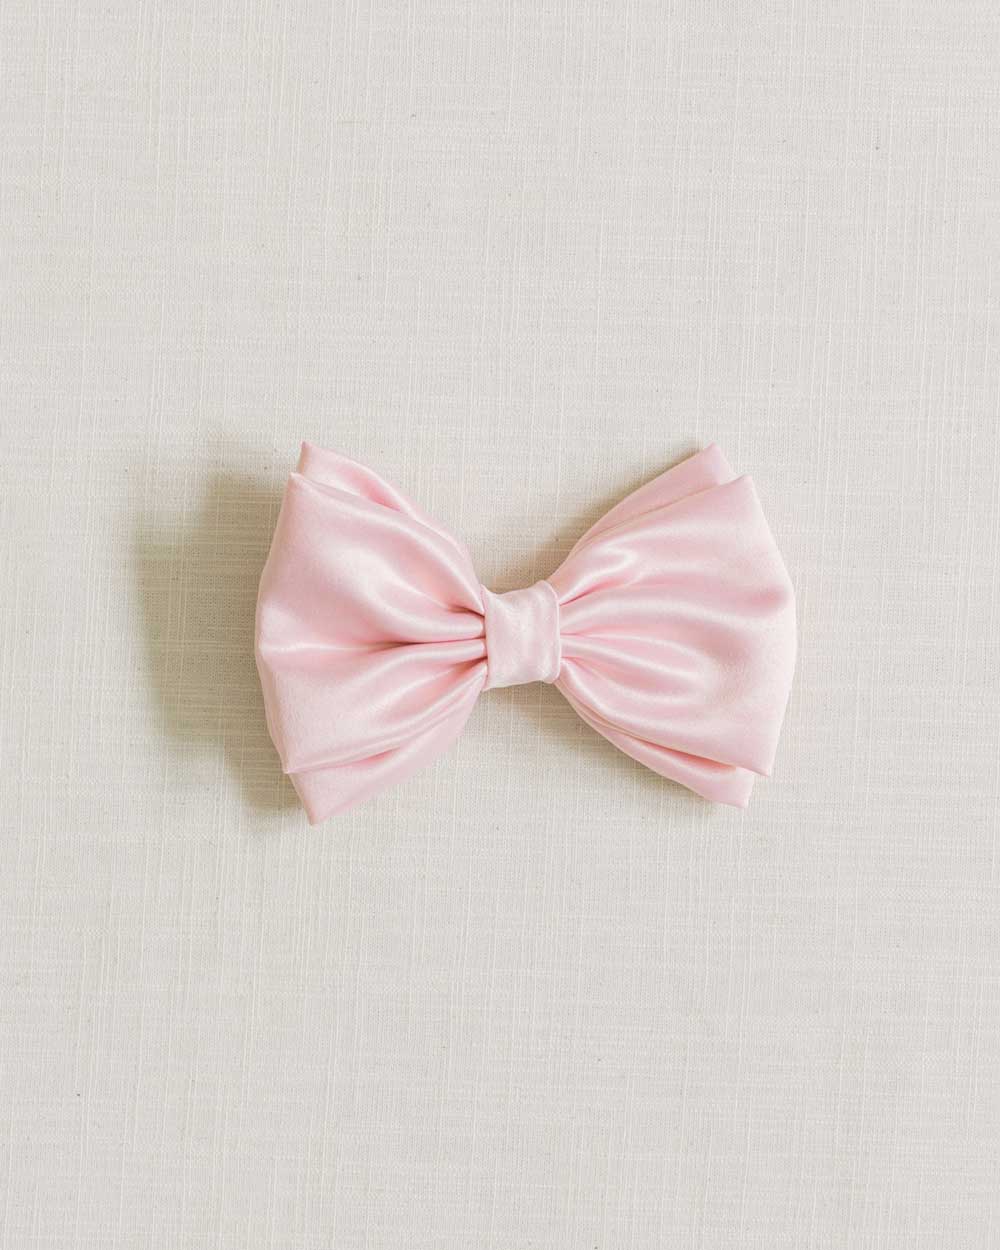 THE PINK SATIN LUXE BOW